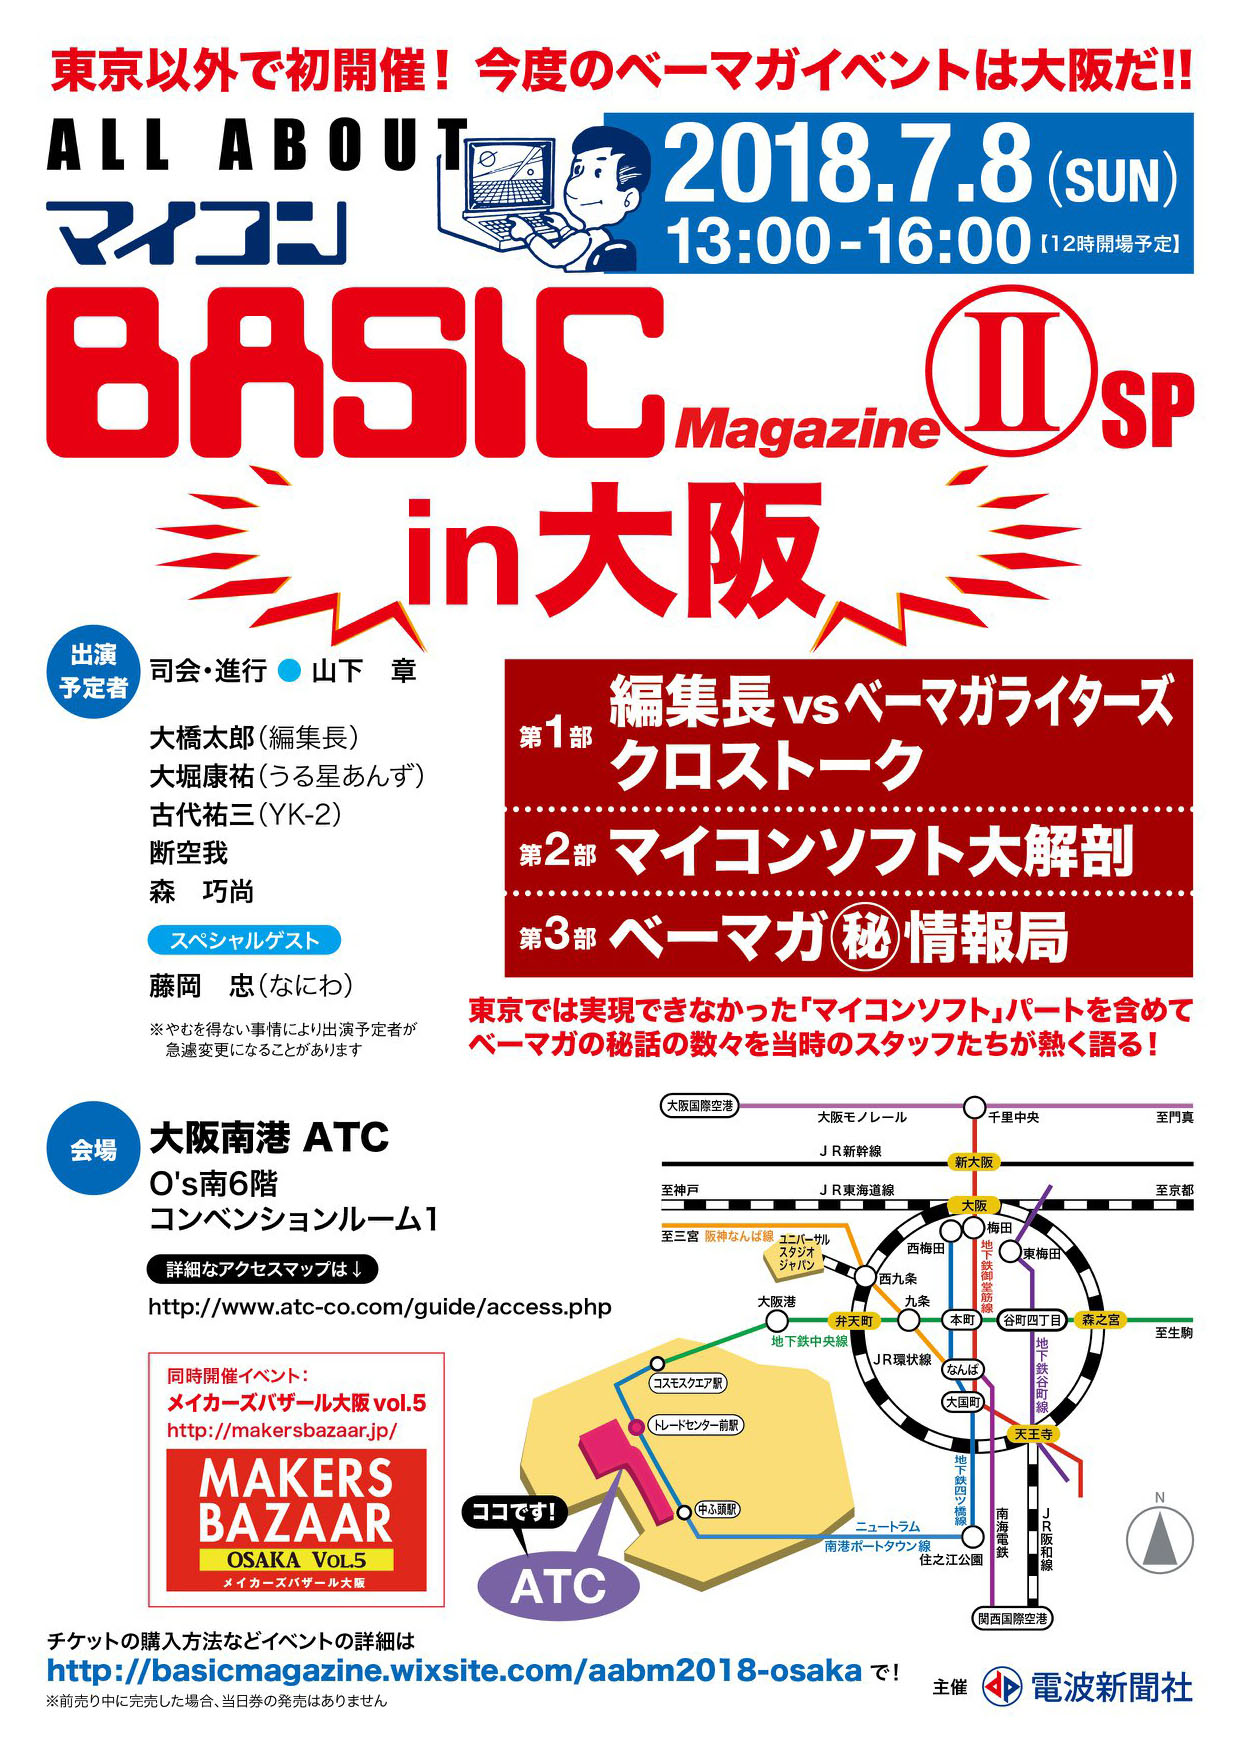 ALL ABOUT マイコンBASICマガジンⅡSP in 大阪